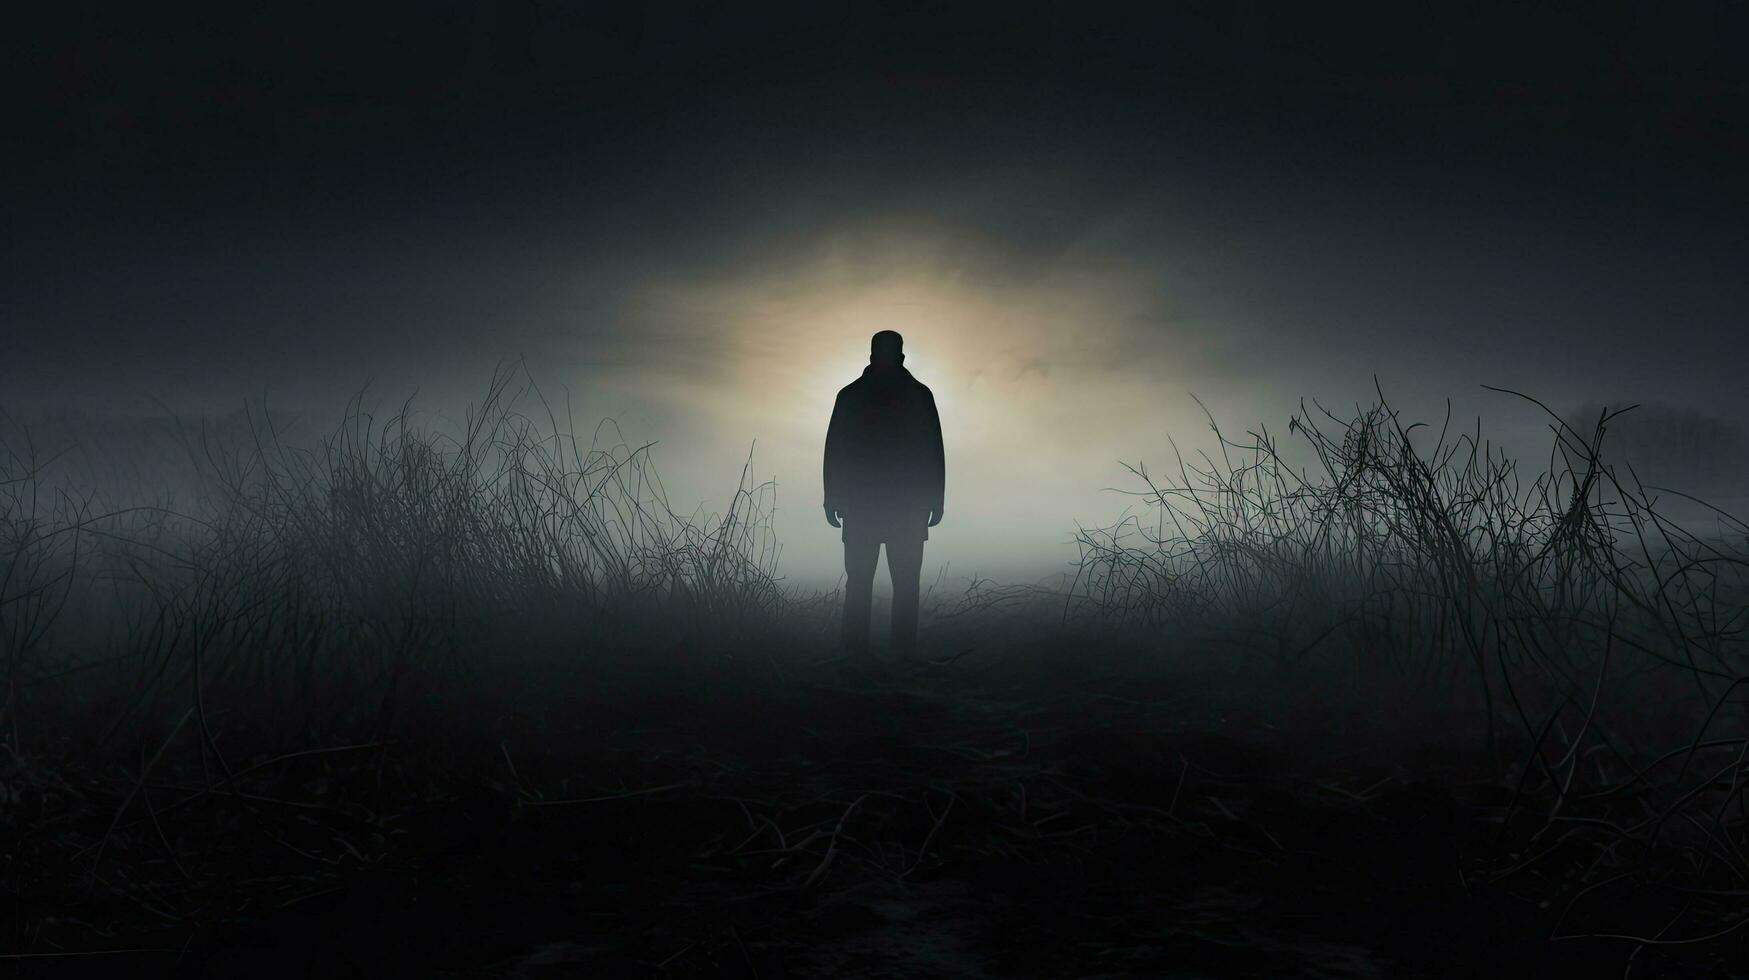 Mysterious figure standing in foggy landscape photo